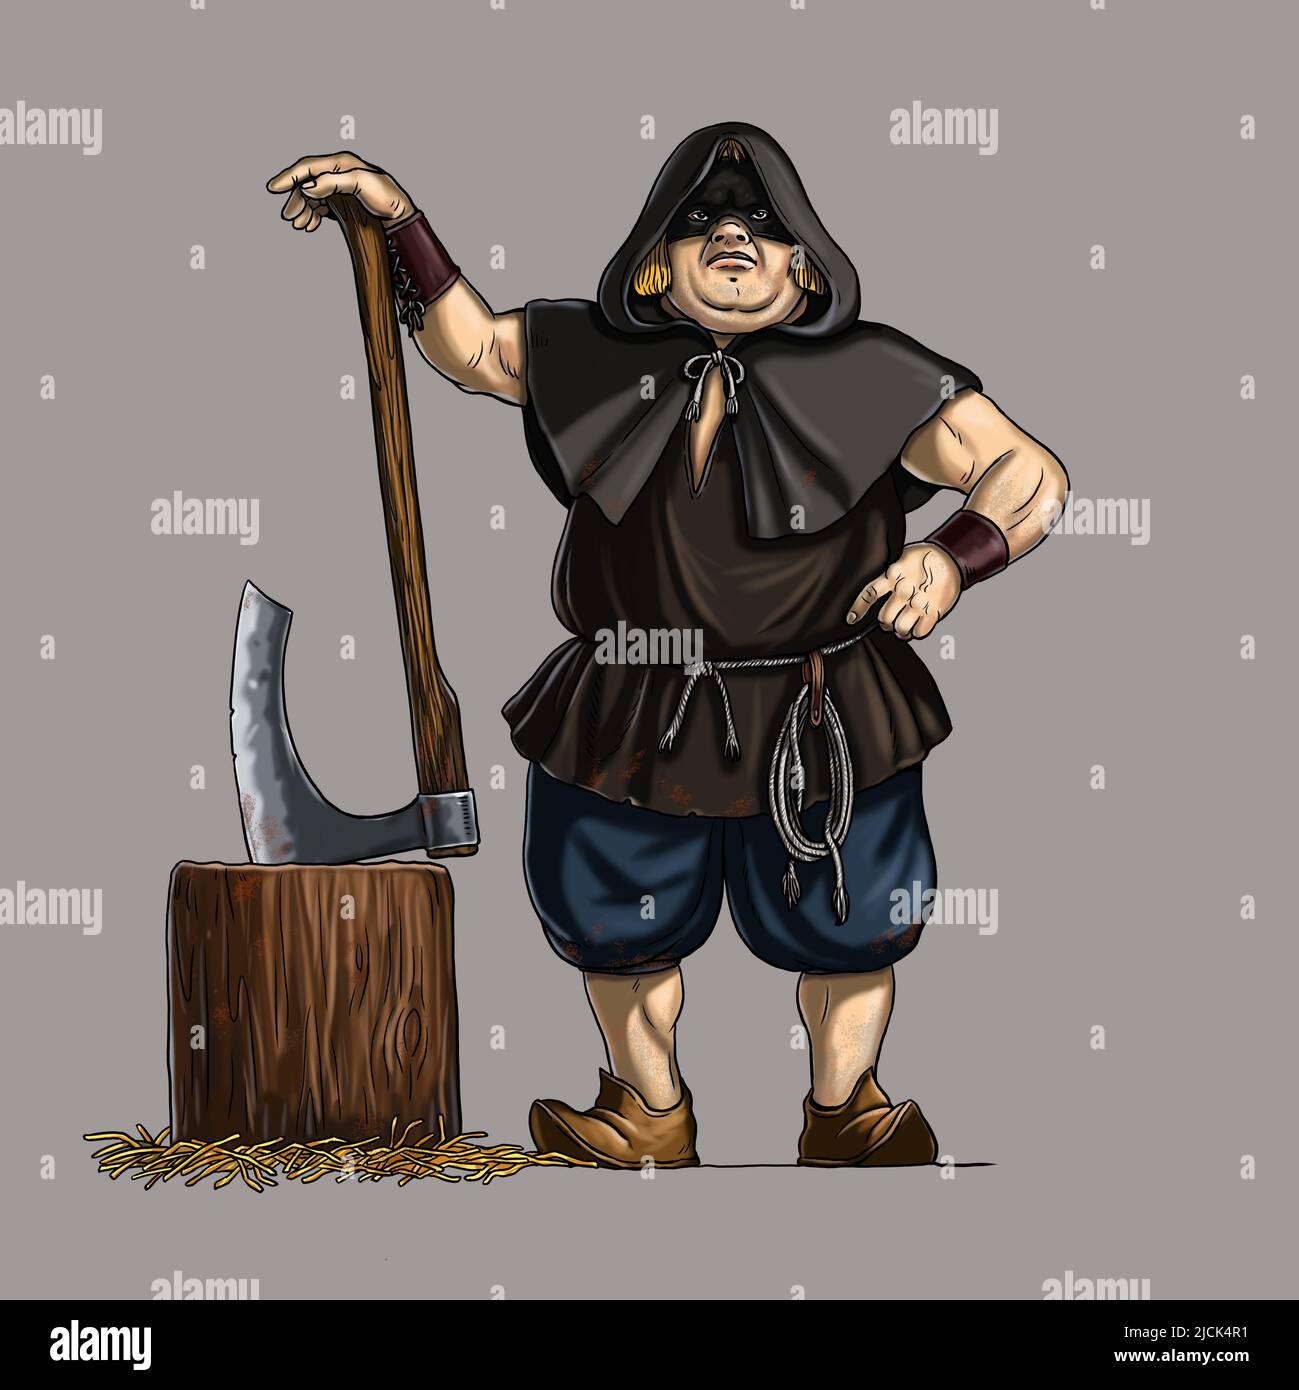 Medieval executioner with an ax. Digital illustration with headsman. Stock Photo